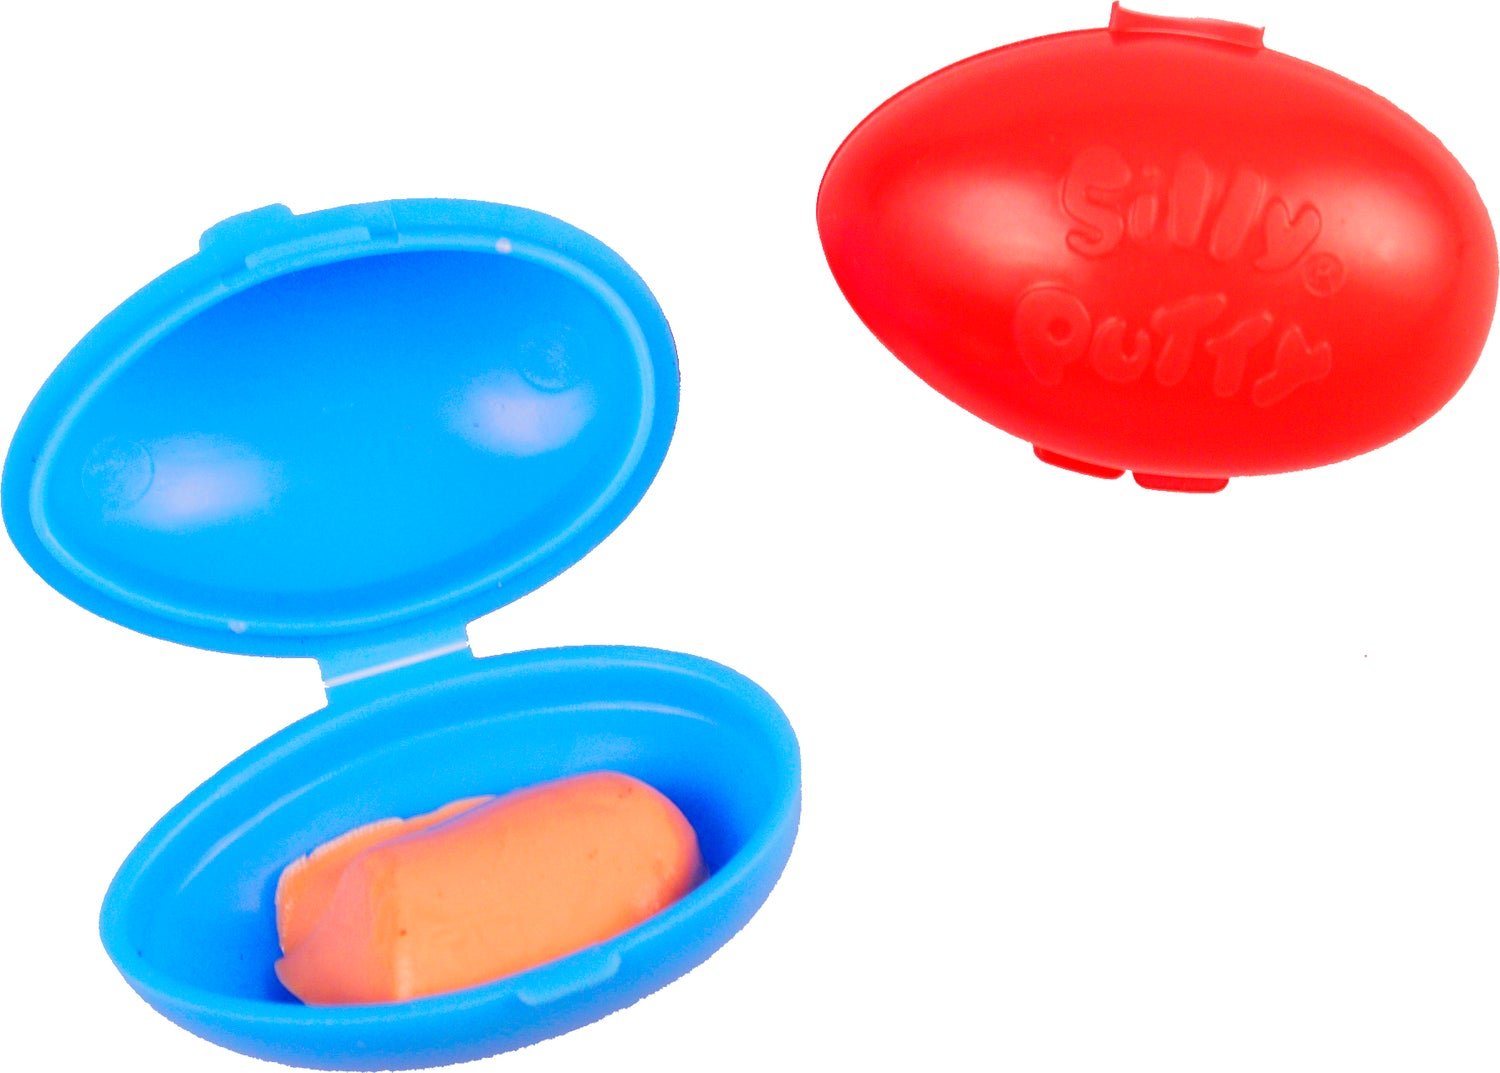 World's Smallest Silly Putty Egg - ANB Baby -Less than $20